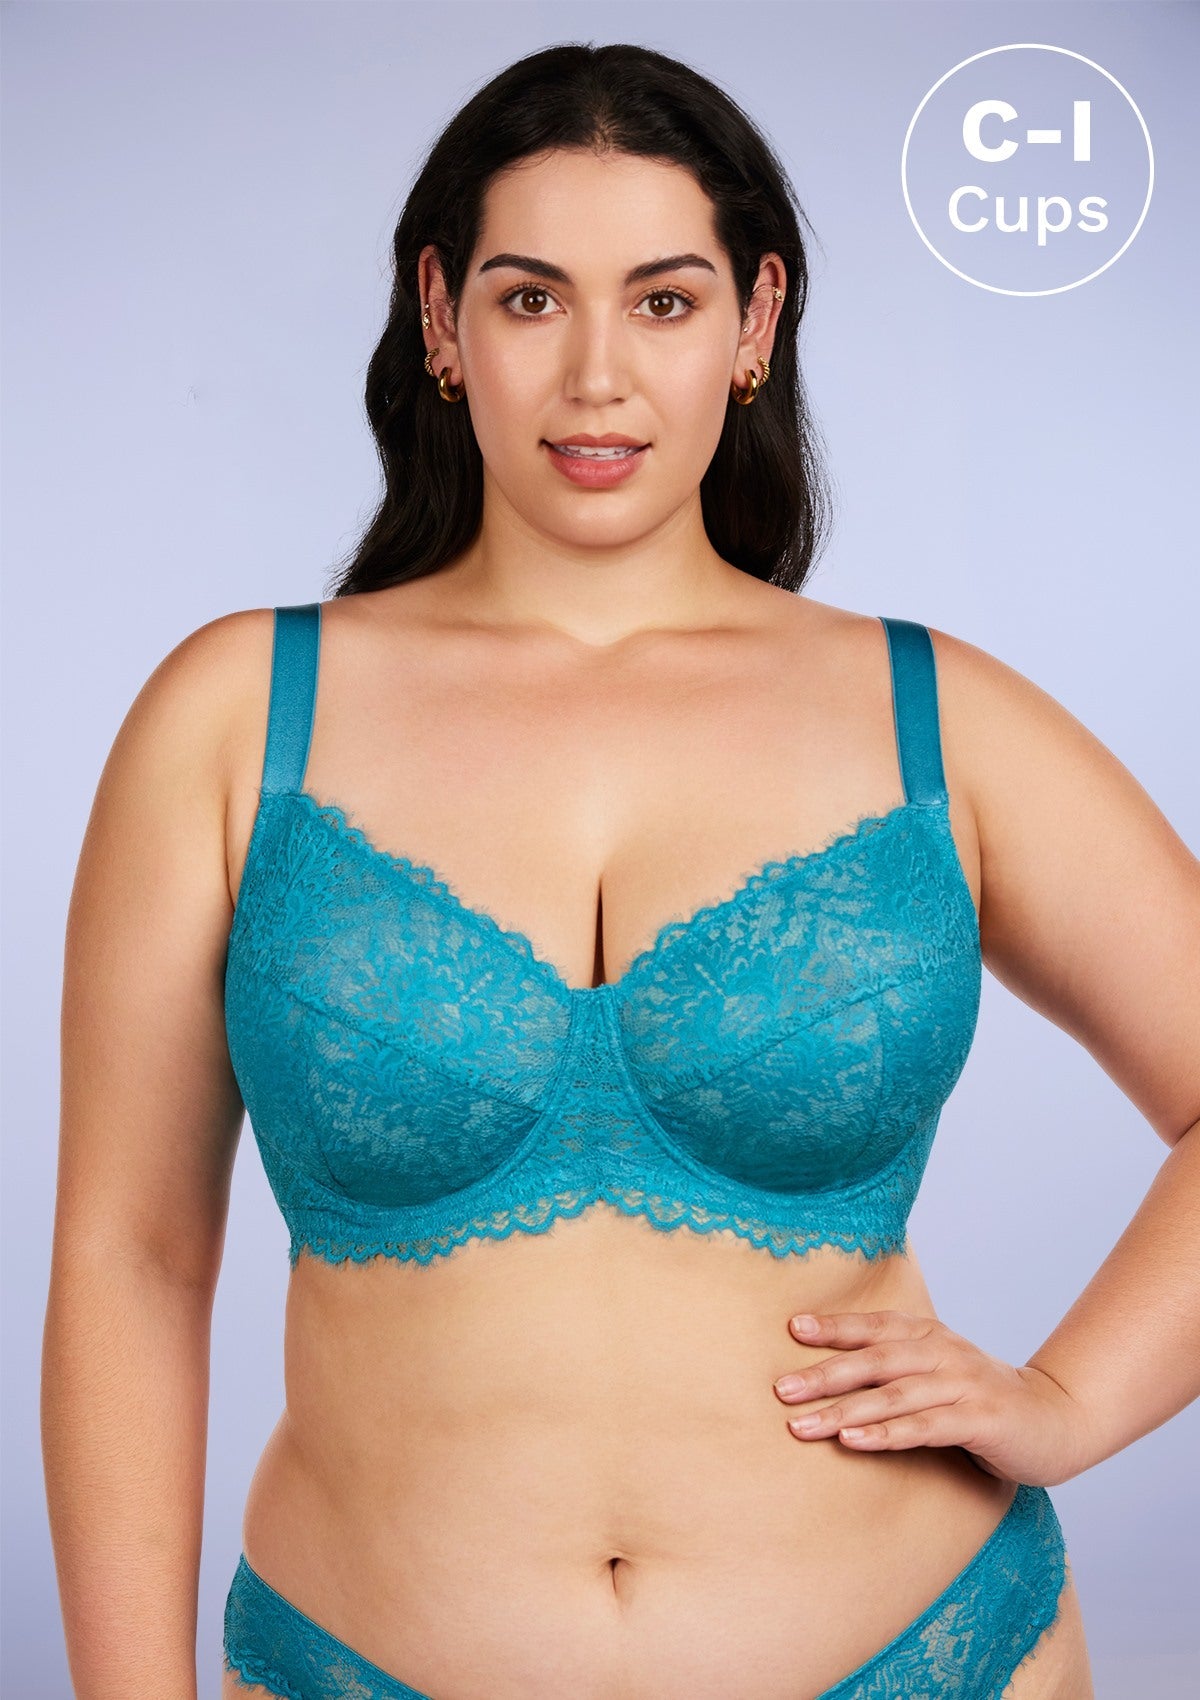 HSIA Sunflower Unlined Lace Bra: Best Bra For Wide Set Breasts - Horizon Blue / 44 / H